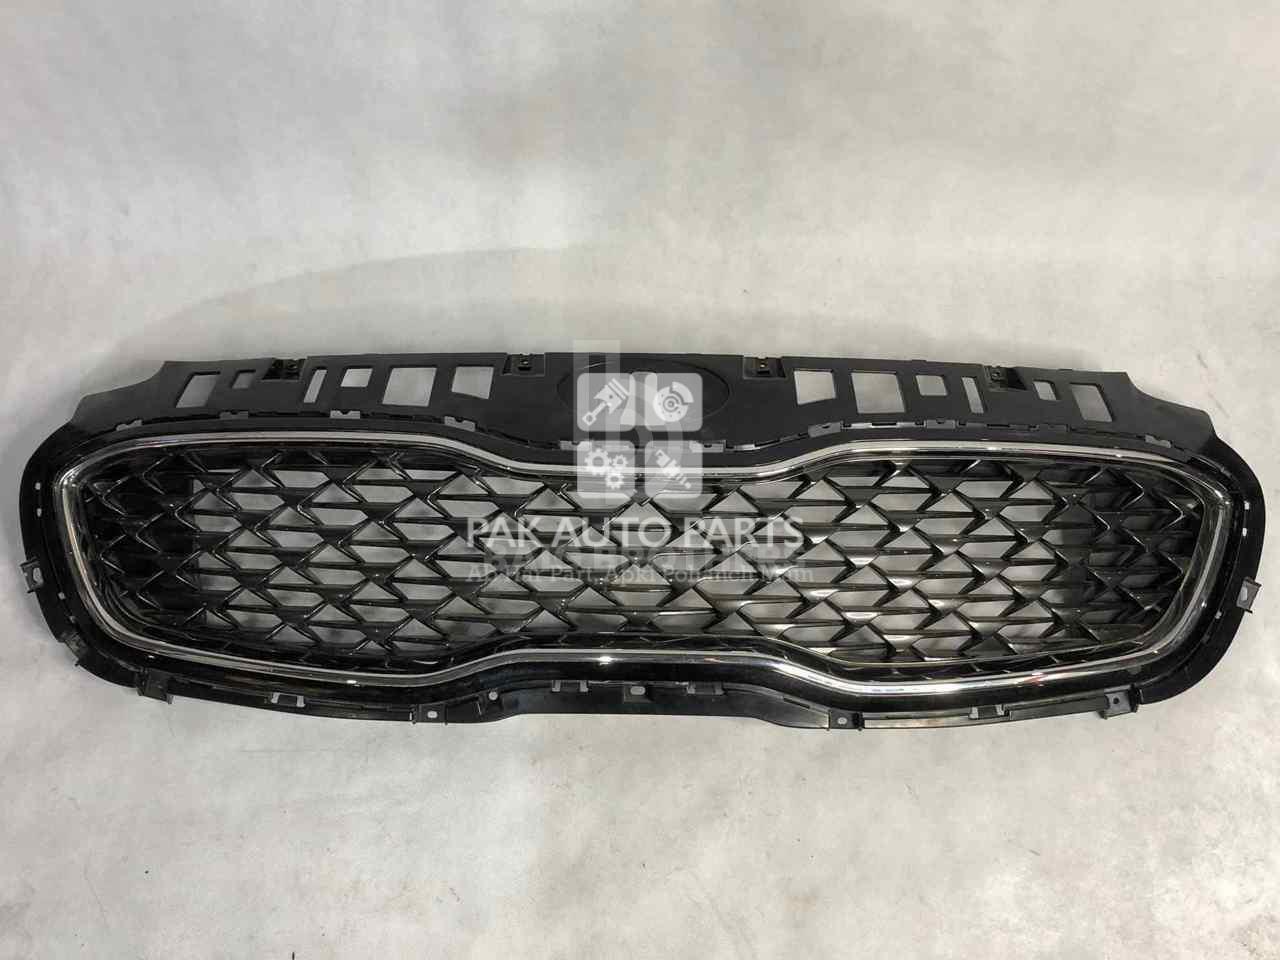 Picture of KIA Sportage 2019 - 2021 Front Grill